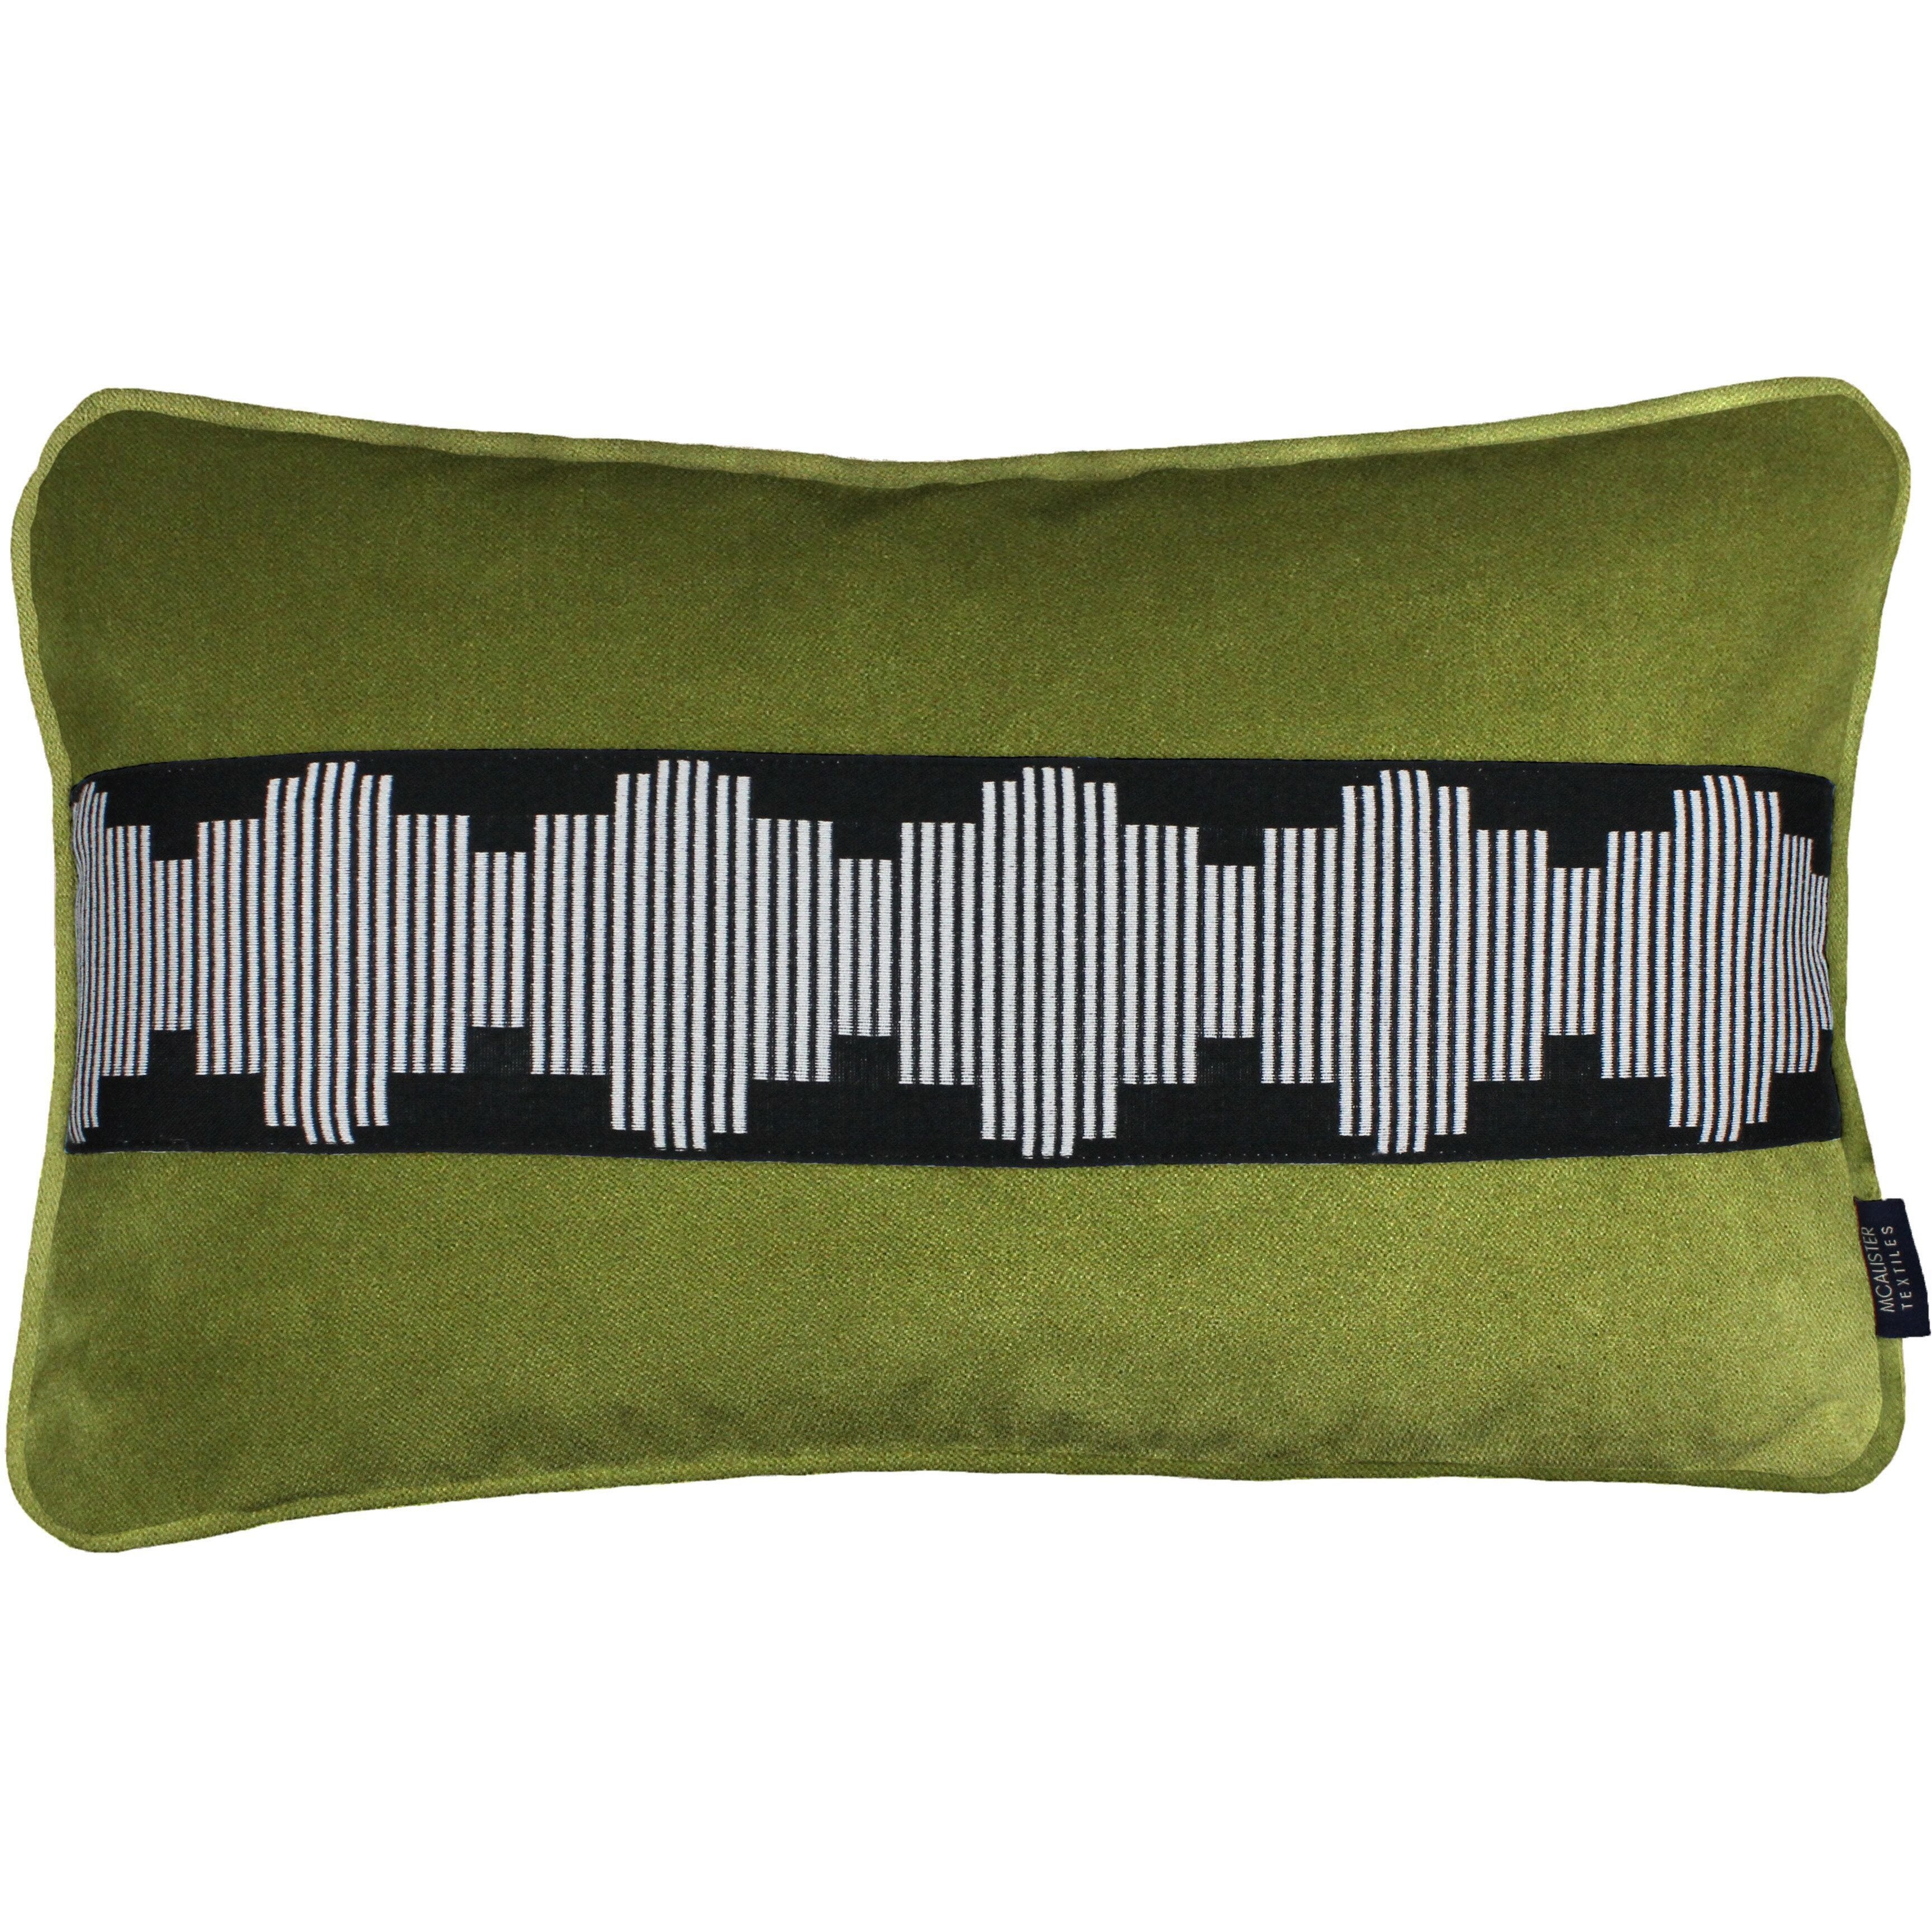 McAlister Textiles Maya Striped Lime Green Velvet Cushion Cushions and Covers Cover Only 50cm x 30cm 